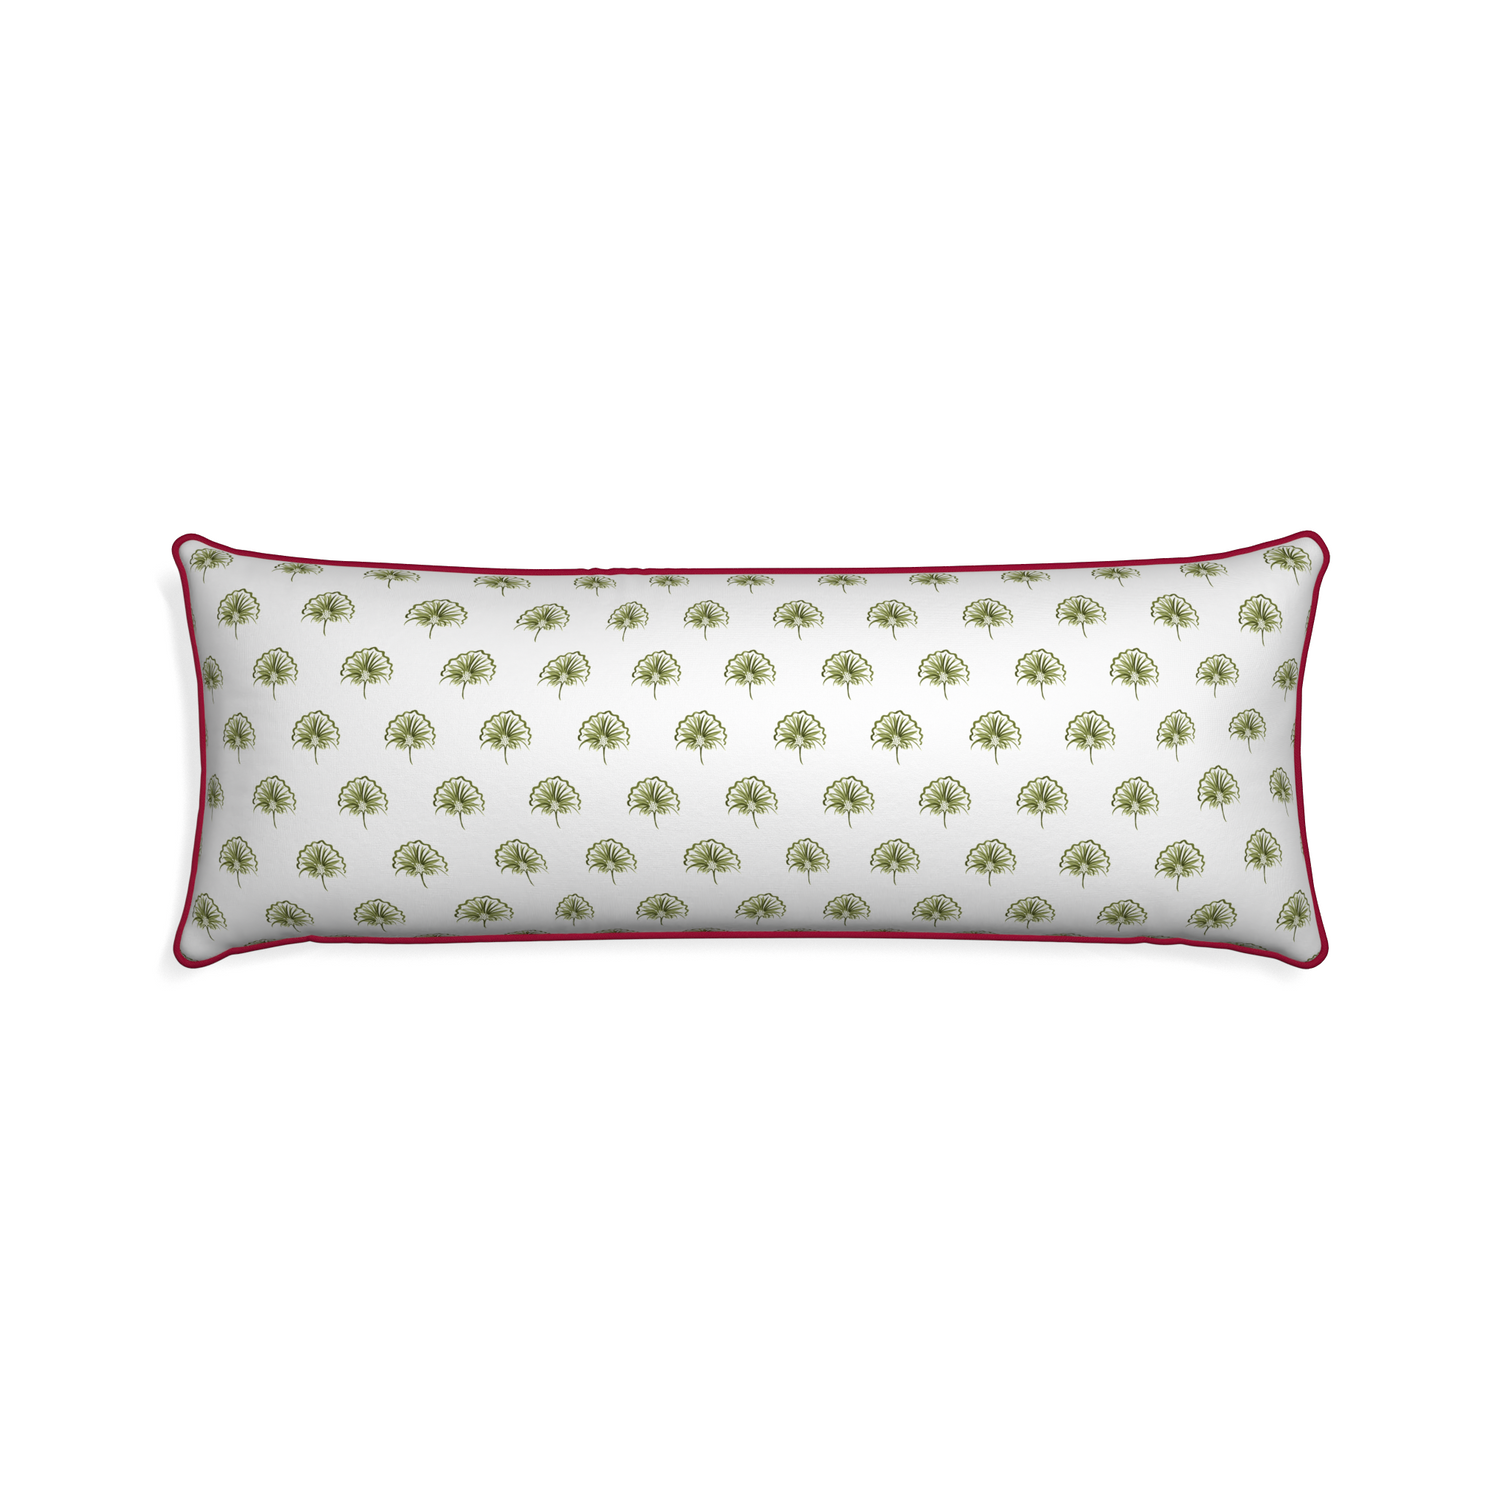 Xl-lumbar penelope moss custom pillow with raspberry piping on white background